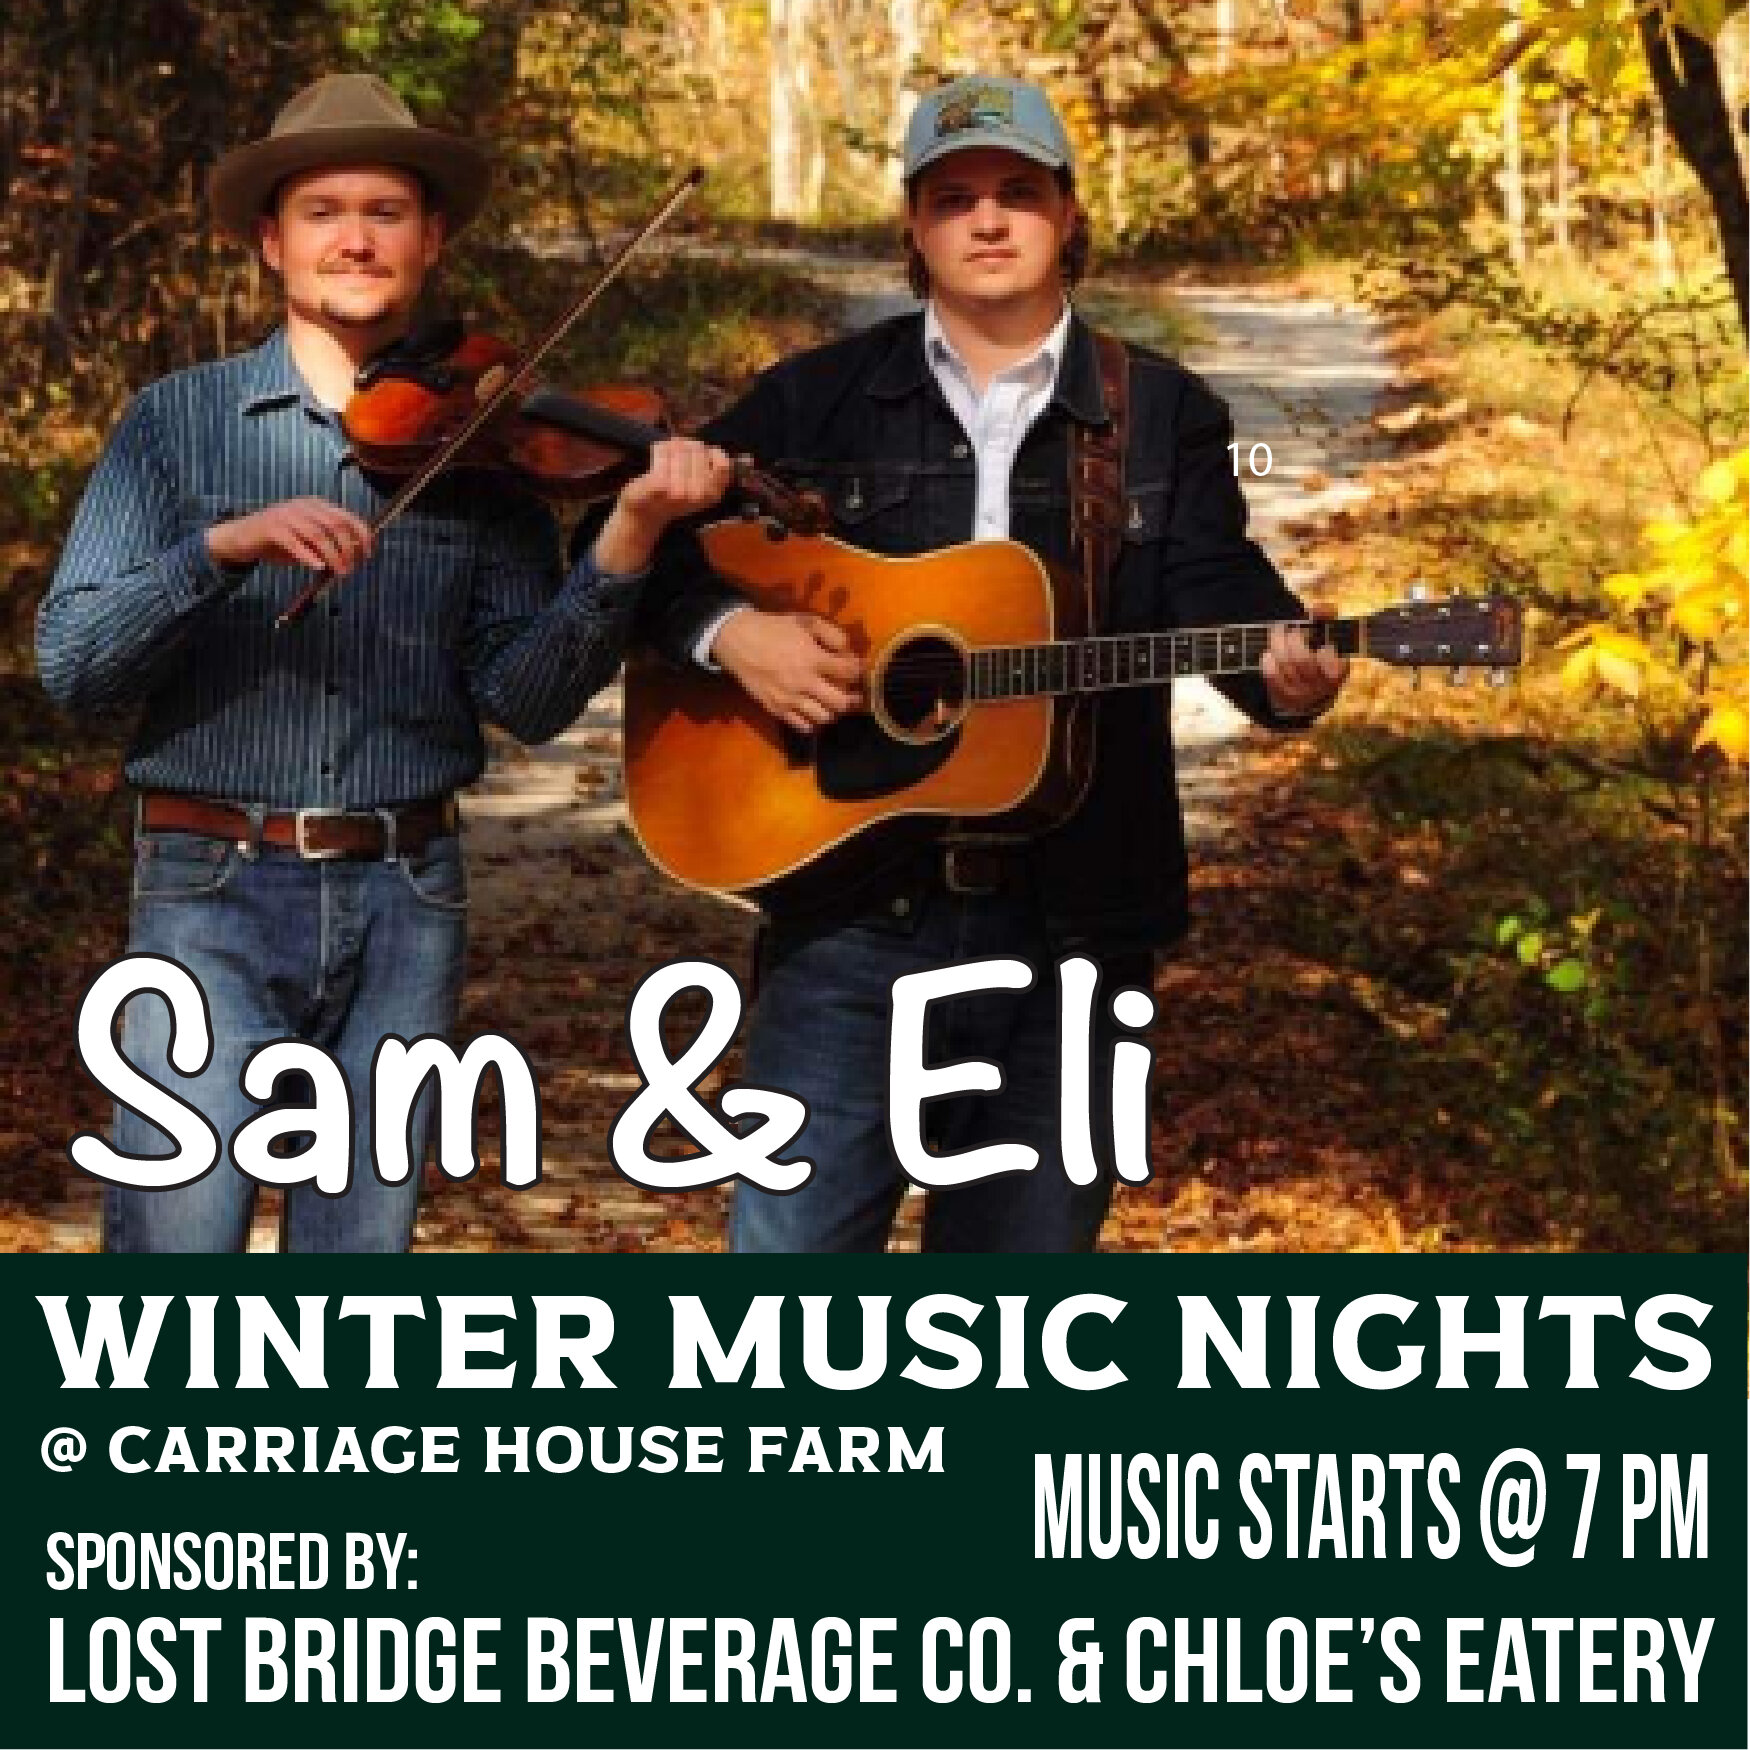 This weekend's music is a great line-up of bluegrass and country.

Friday night we have Elijah Bedel &amp; Sam Hibbard for some serious plucking and fiddling...and that's a Lent Fish Fry night at Chloe's Eatery too! 

Saturday is our buddy Chase McCr